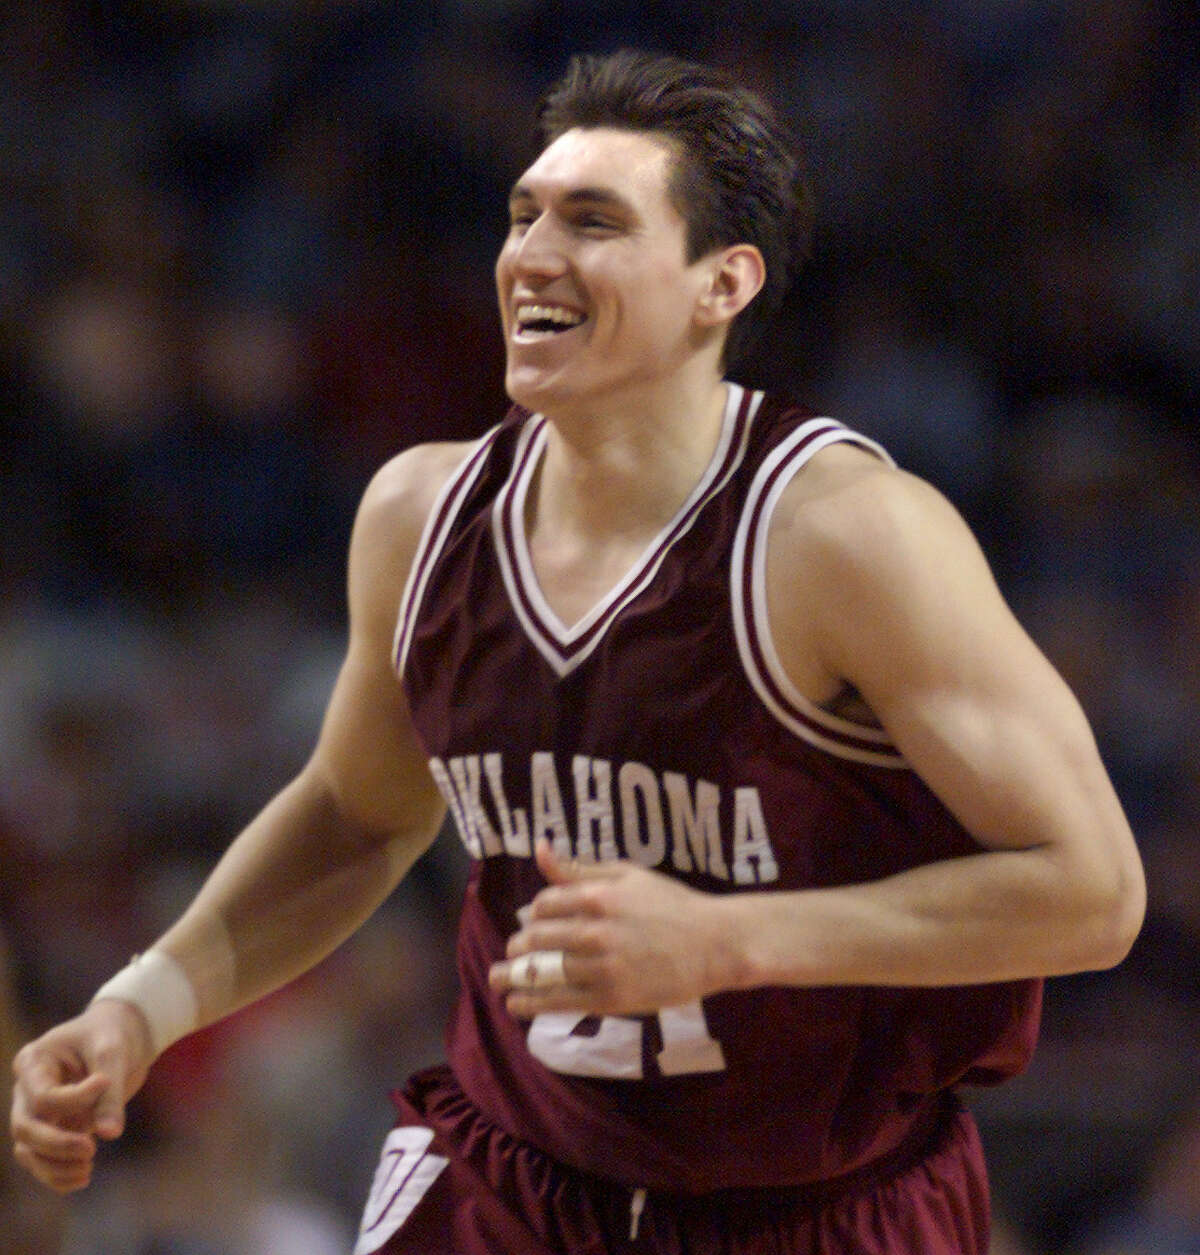 SPORTS - A happy Oklahoma Sooner Eduardo Najera runs down court after scoring two of his 31 points as Oklahoma defeated Texas during their Big 12 Conference men's basketball game in Kansas City, Missouri on Saturday, March 11, 2000. Oklahoma won over Texas 81-65. Kin Man Hui/staff.